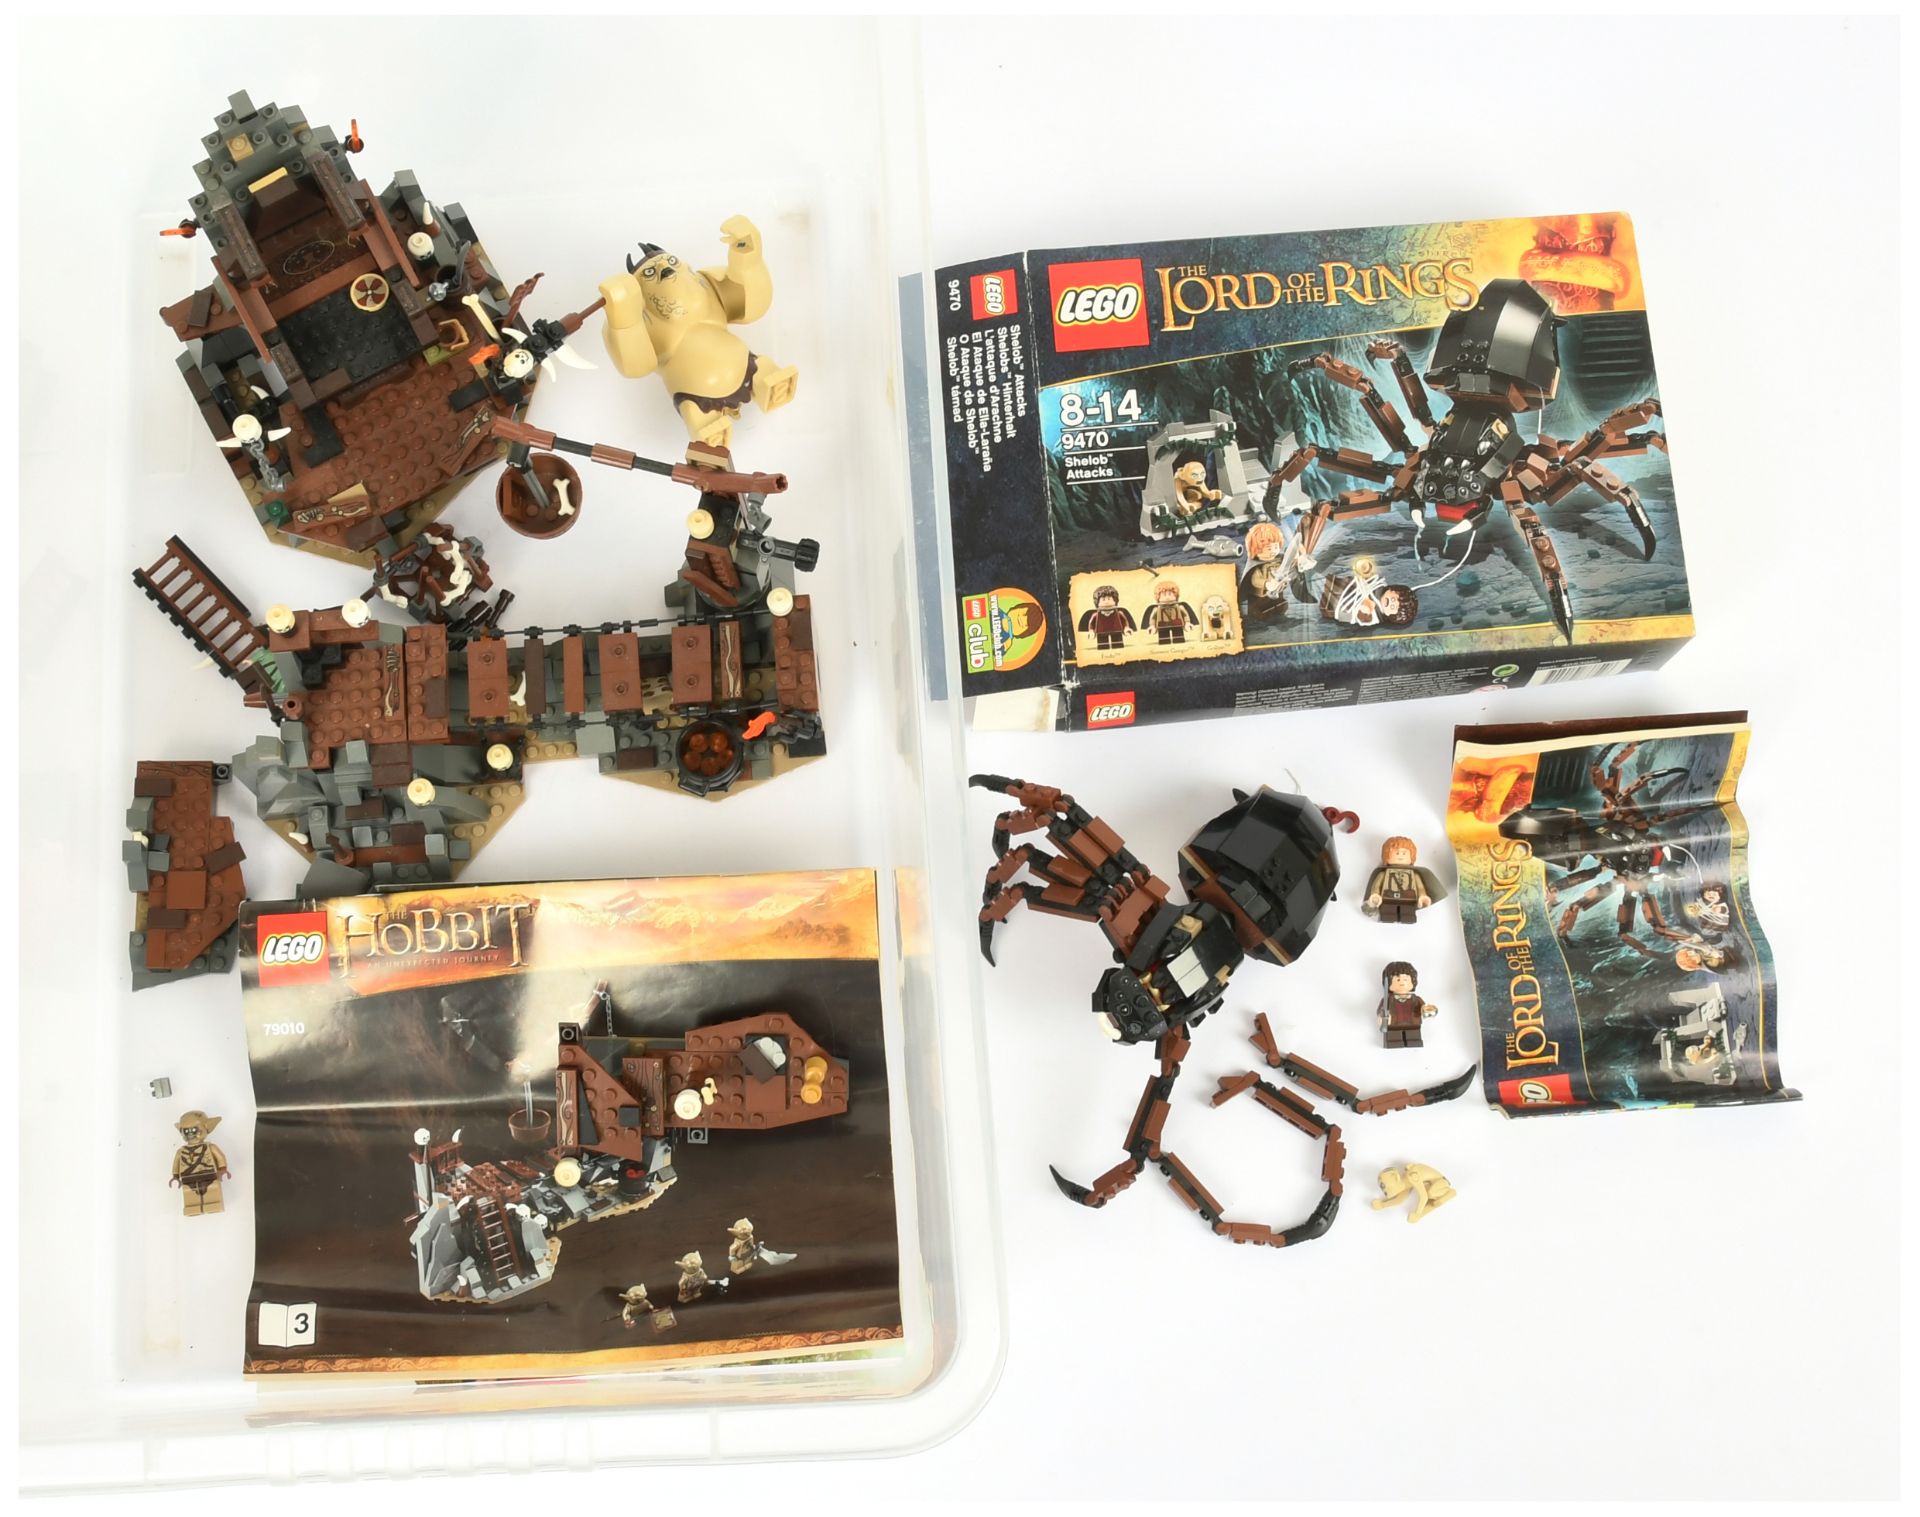 Lego Tolkien Pair (1) 9470 Lord Of The Rings - Shelob Attacks - built model, with box & instructi...